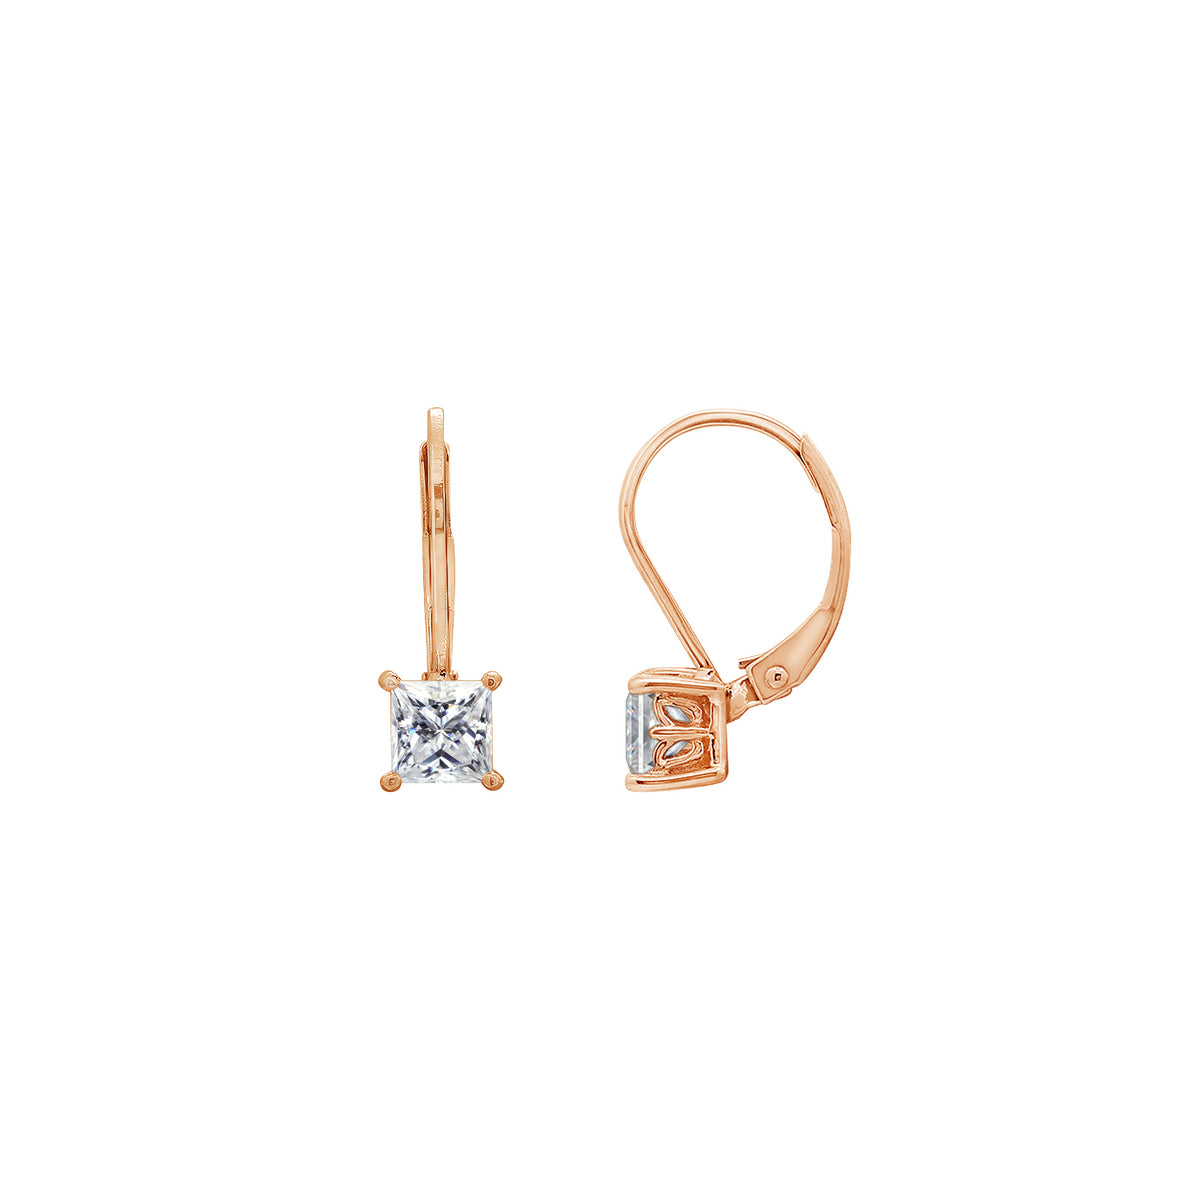 Princess Solitaire Earrings with Leverback